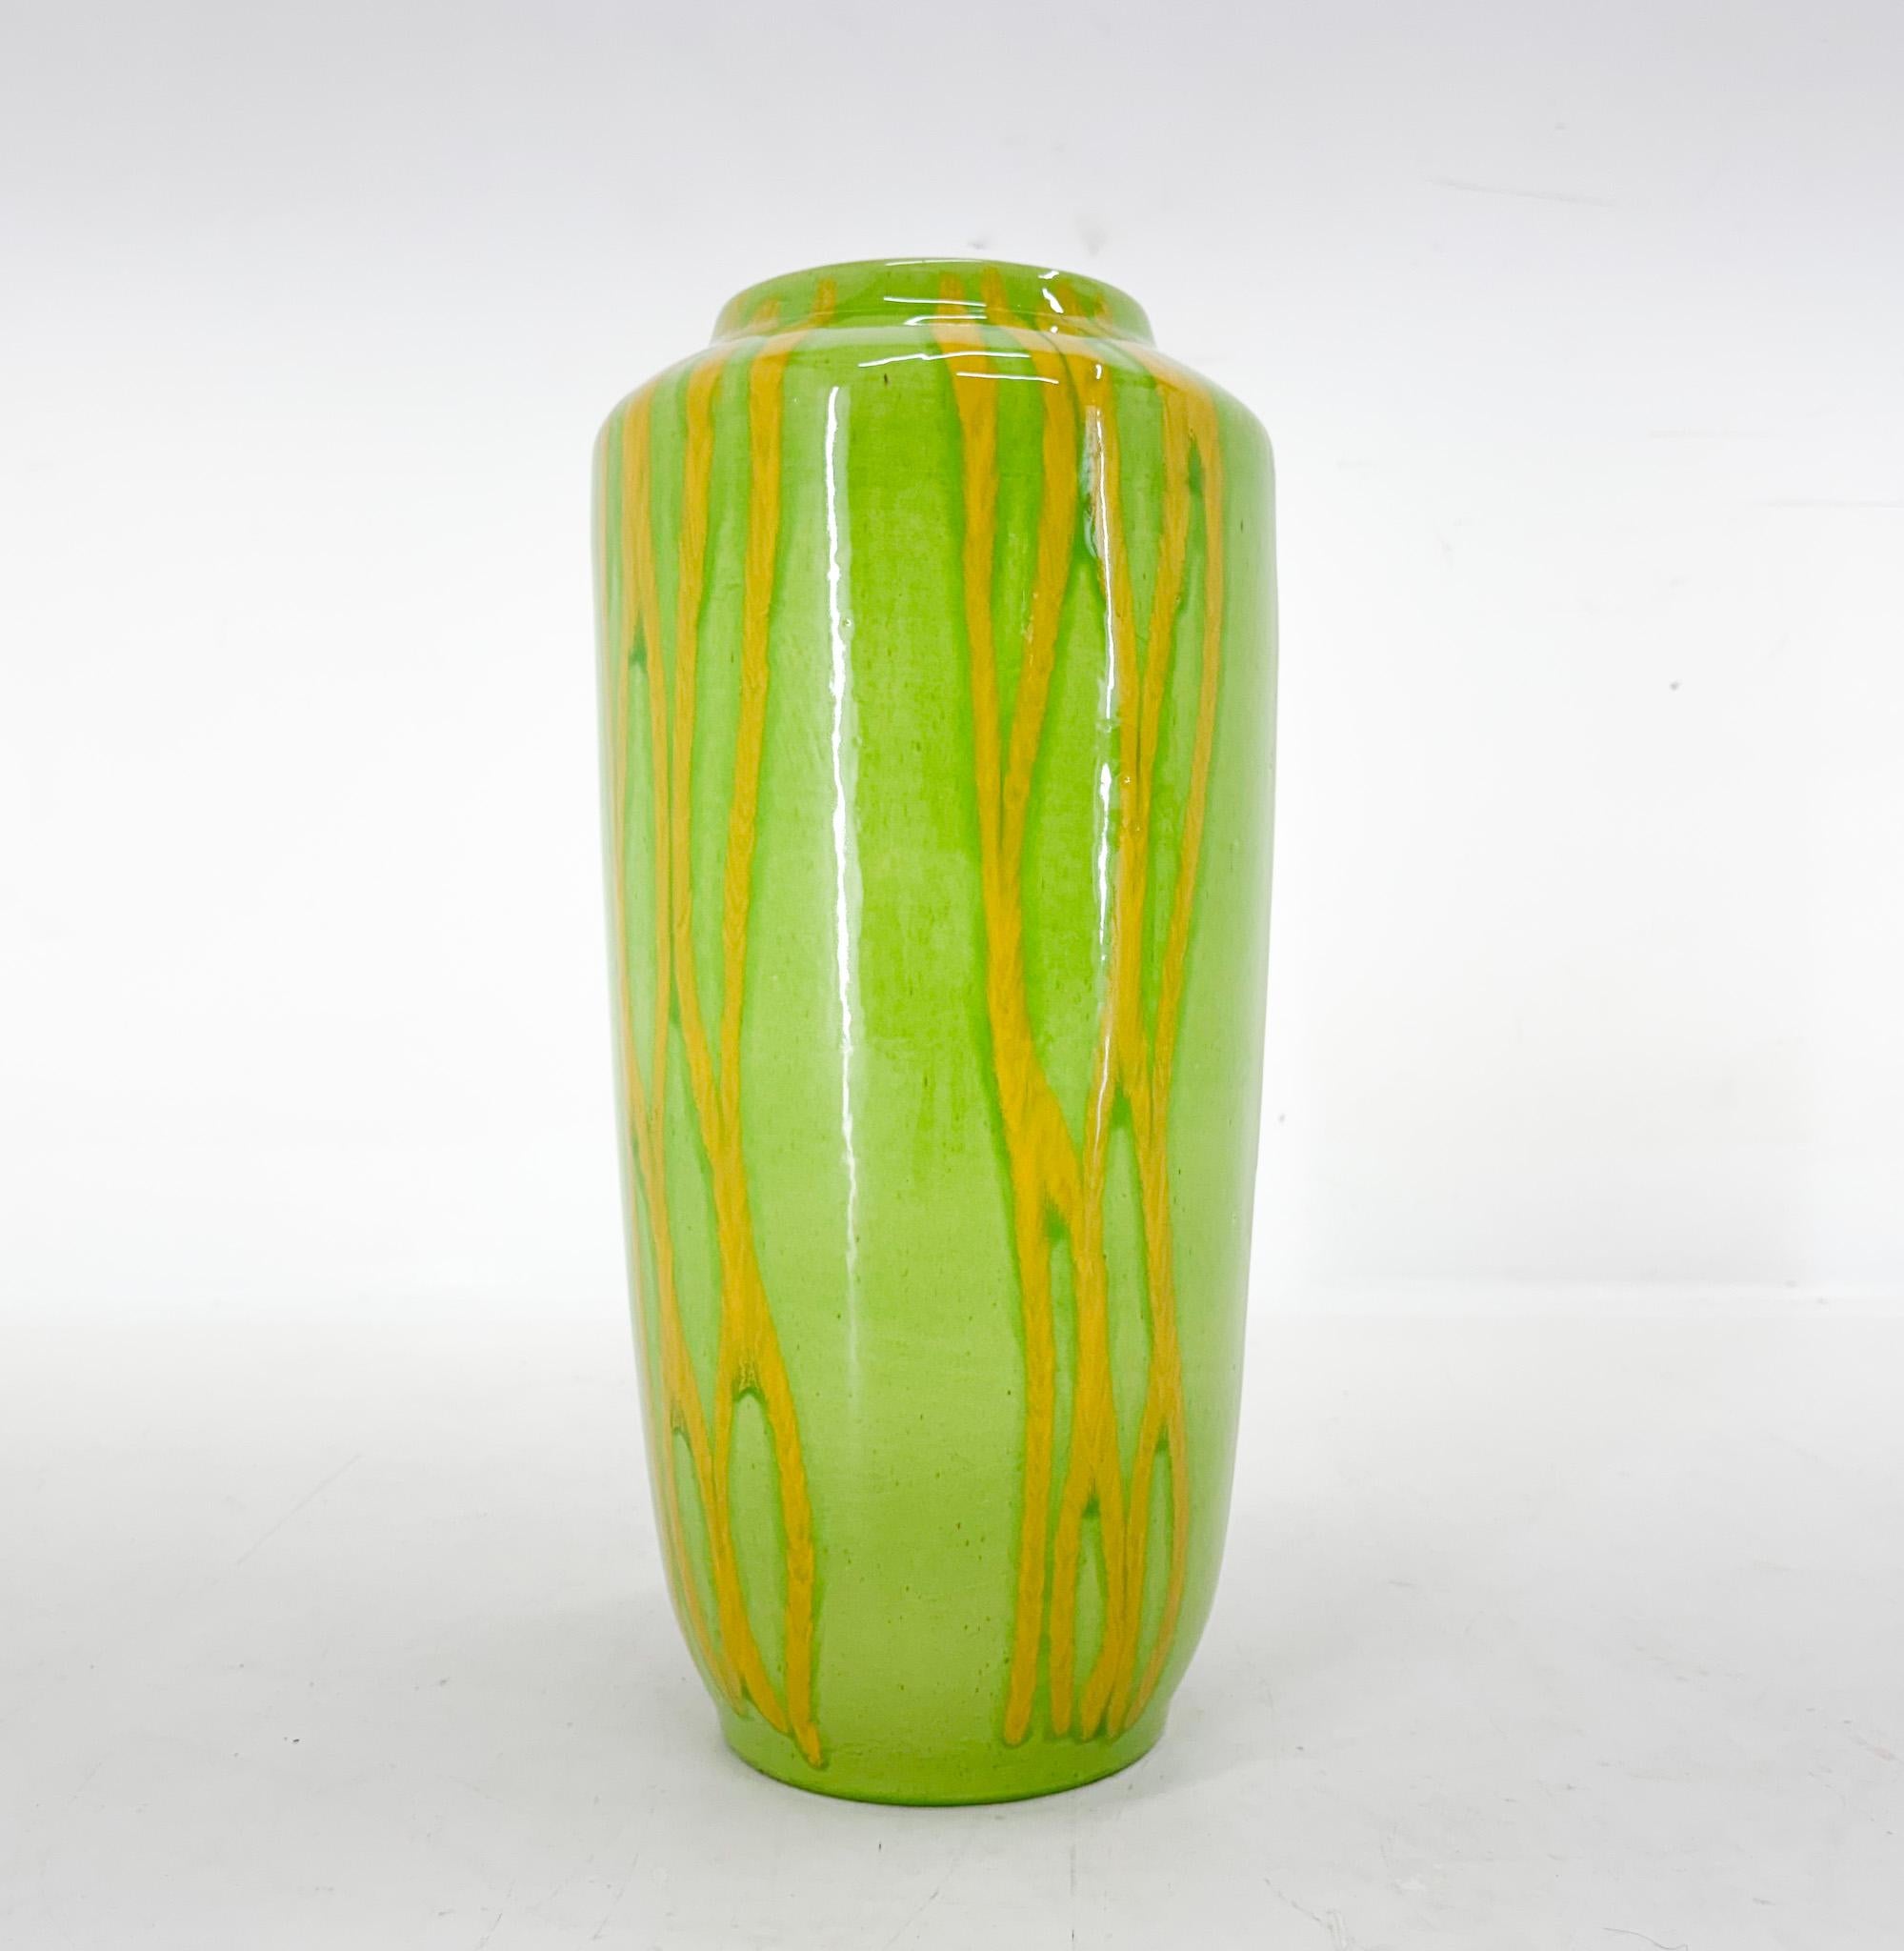 Gorgeous German vintage large floor vase from Scheurich Keramik. Produced in Germany in the 1970's.